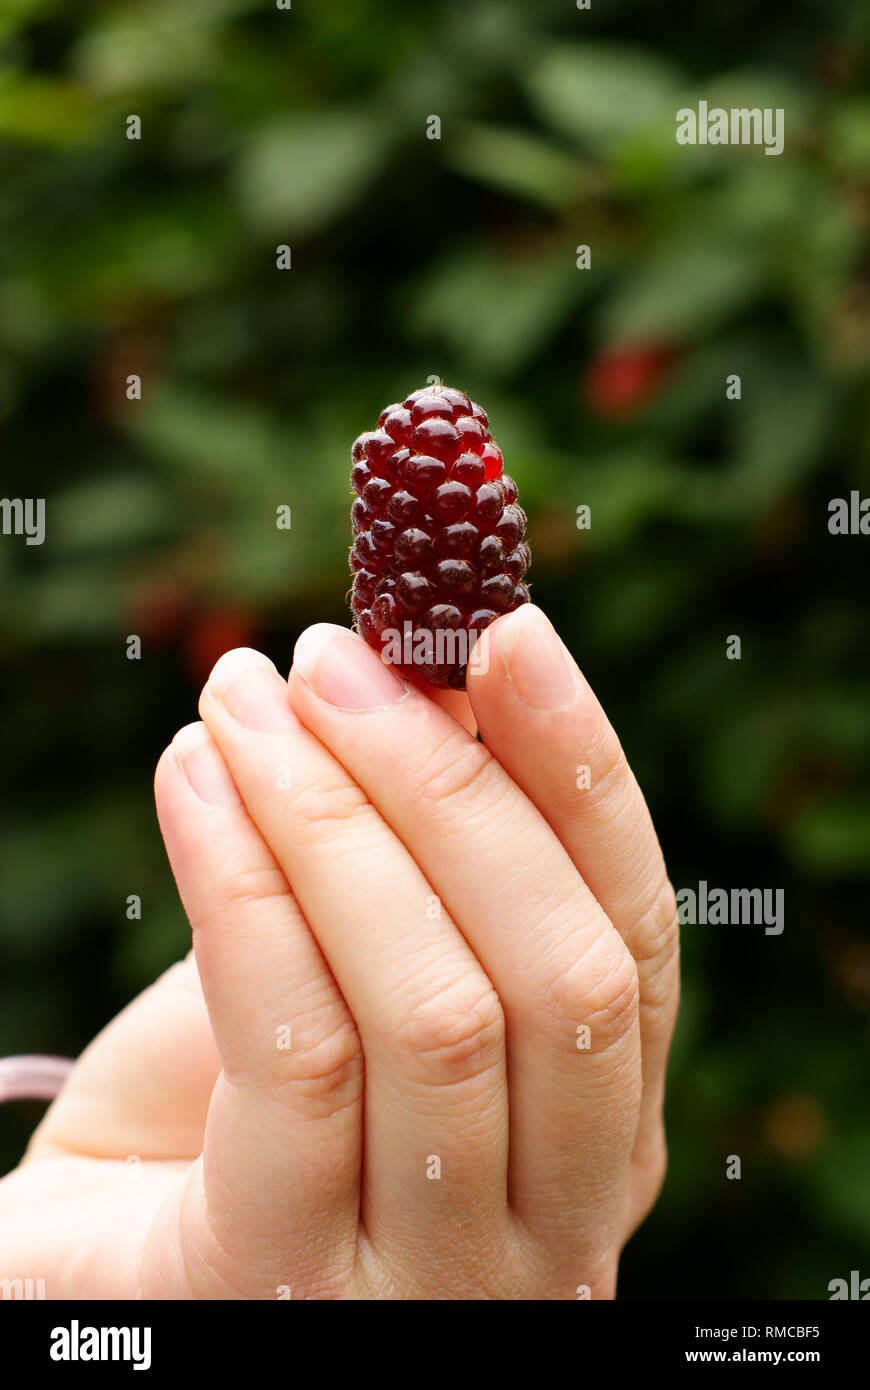 Picking ripe loganberry soft fruit on a pick your own fruit farm Stock Photo